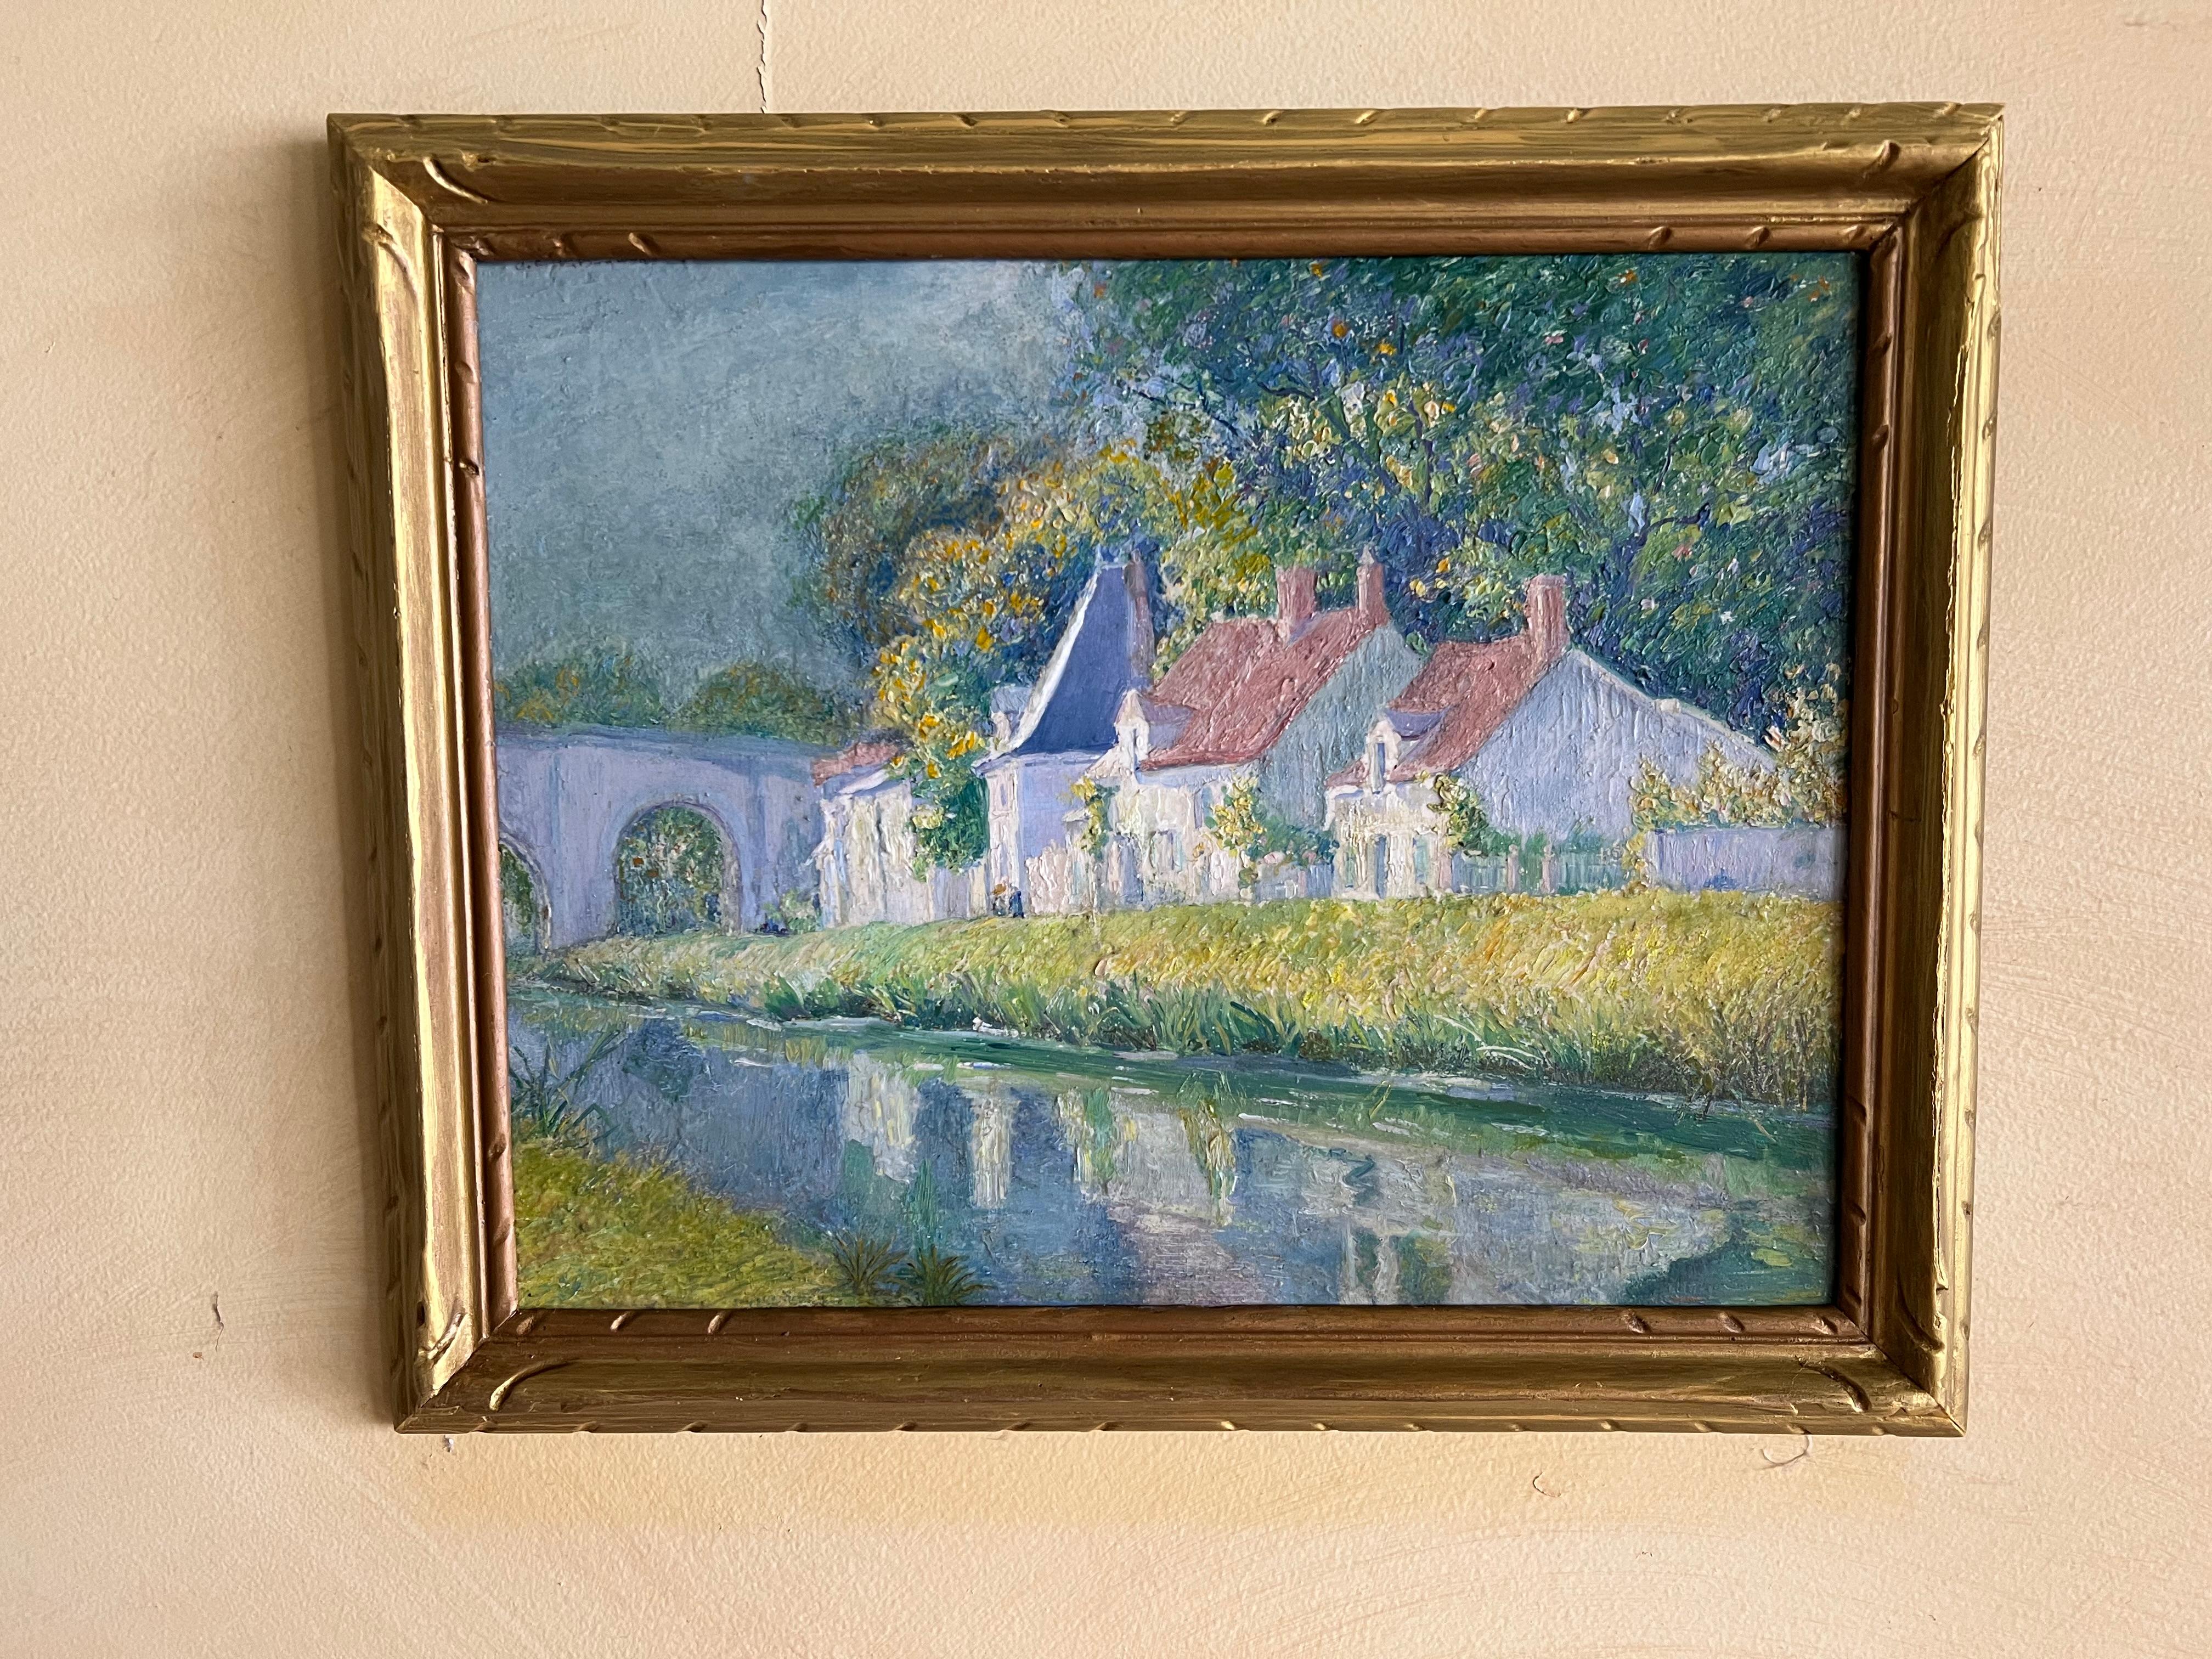 A lovely impressionist painting by Abel Warshawsky. Painted in 1928 while in France.
Provenance: Acquired directly from the artist in 1928 by a private American collector; then by descent in the family.